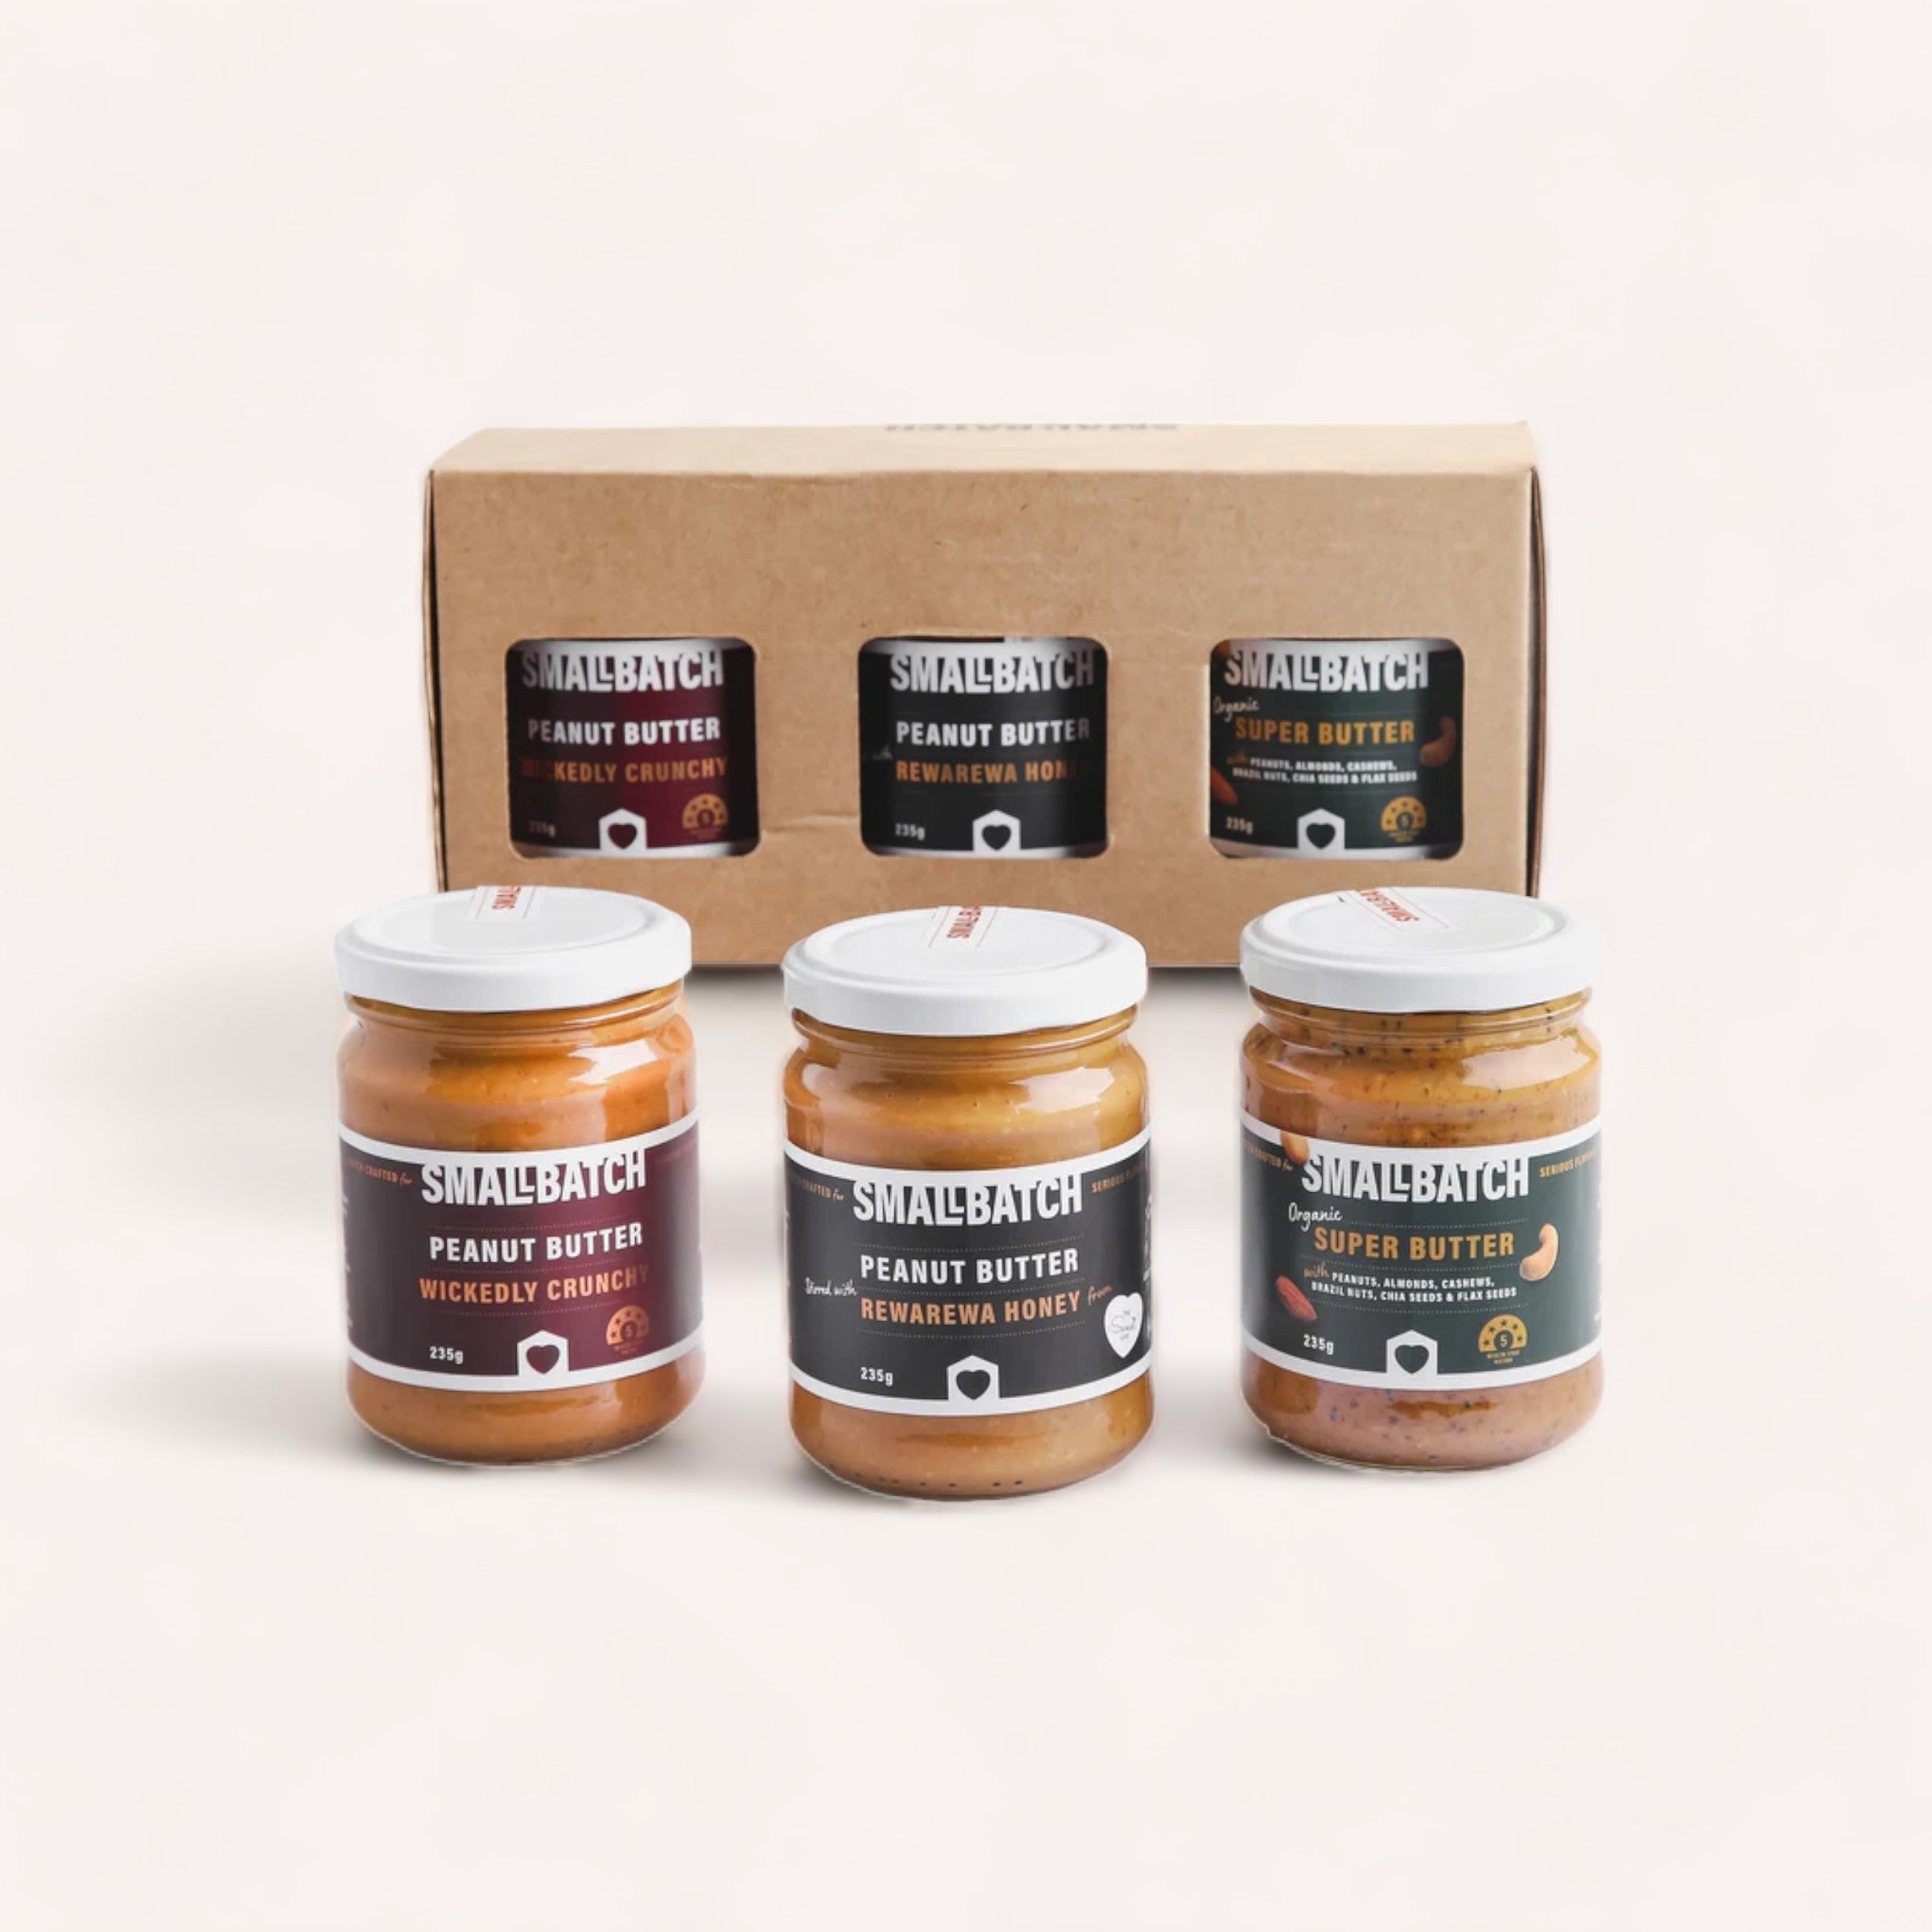 pack of 3 peanut butter spreads by small batch